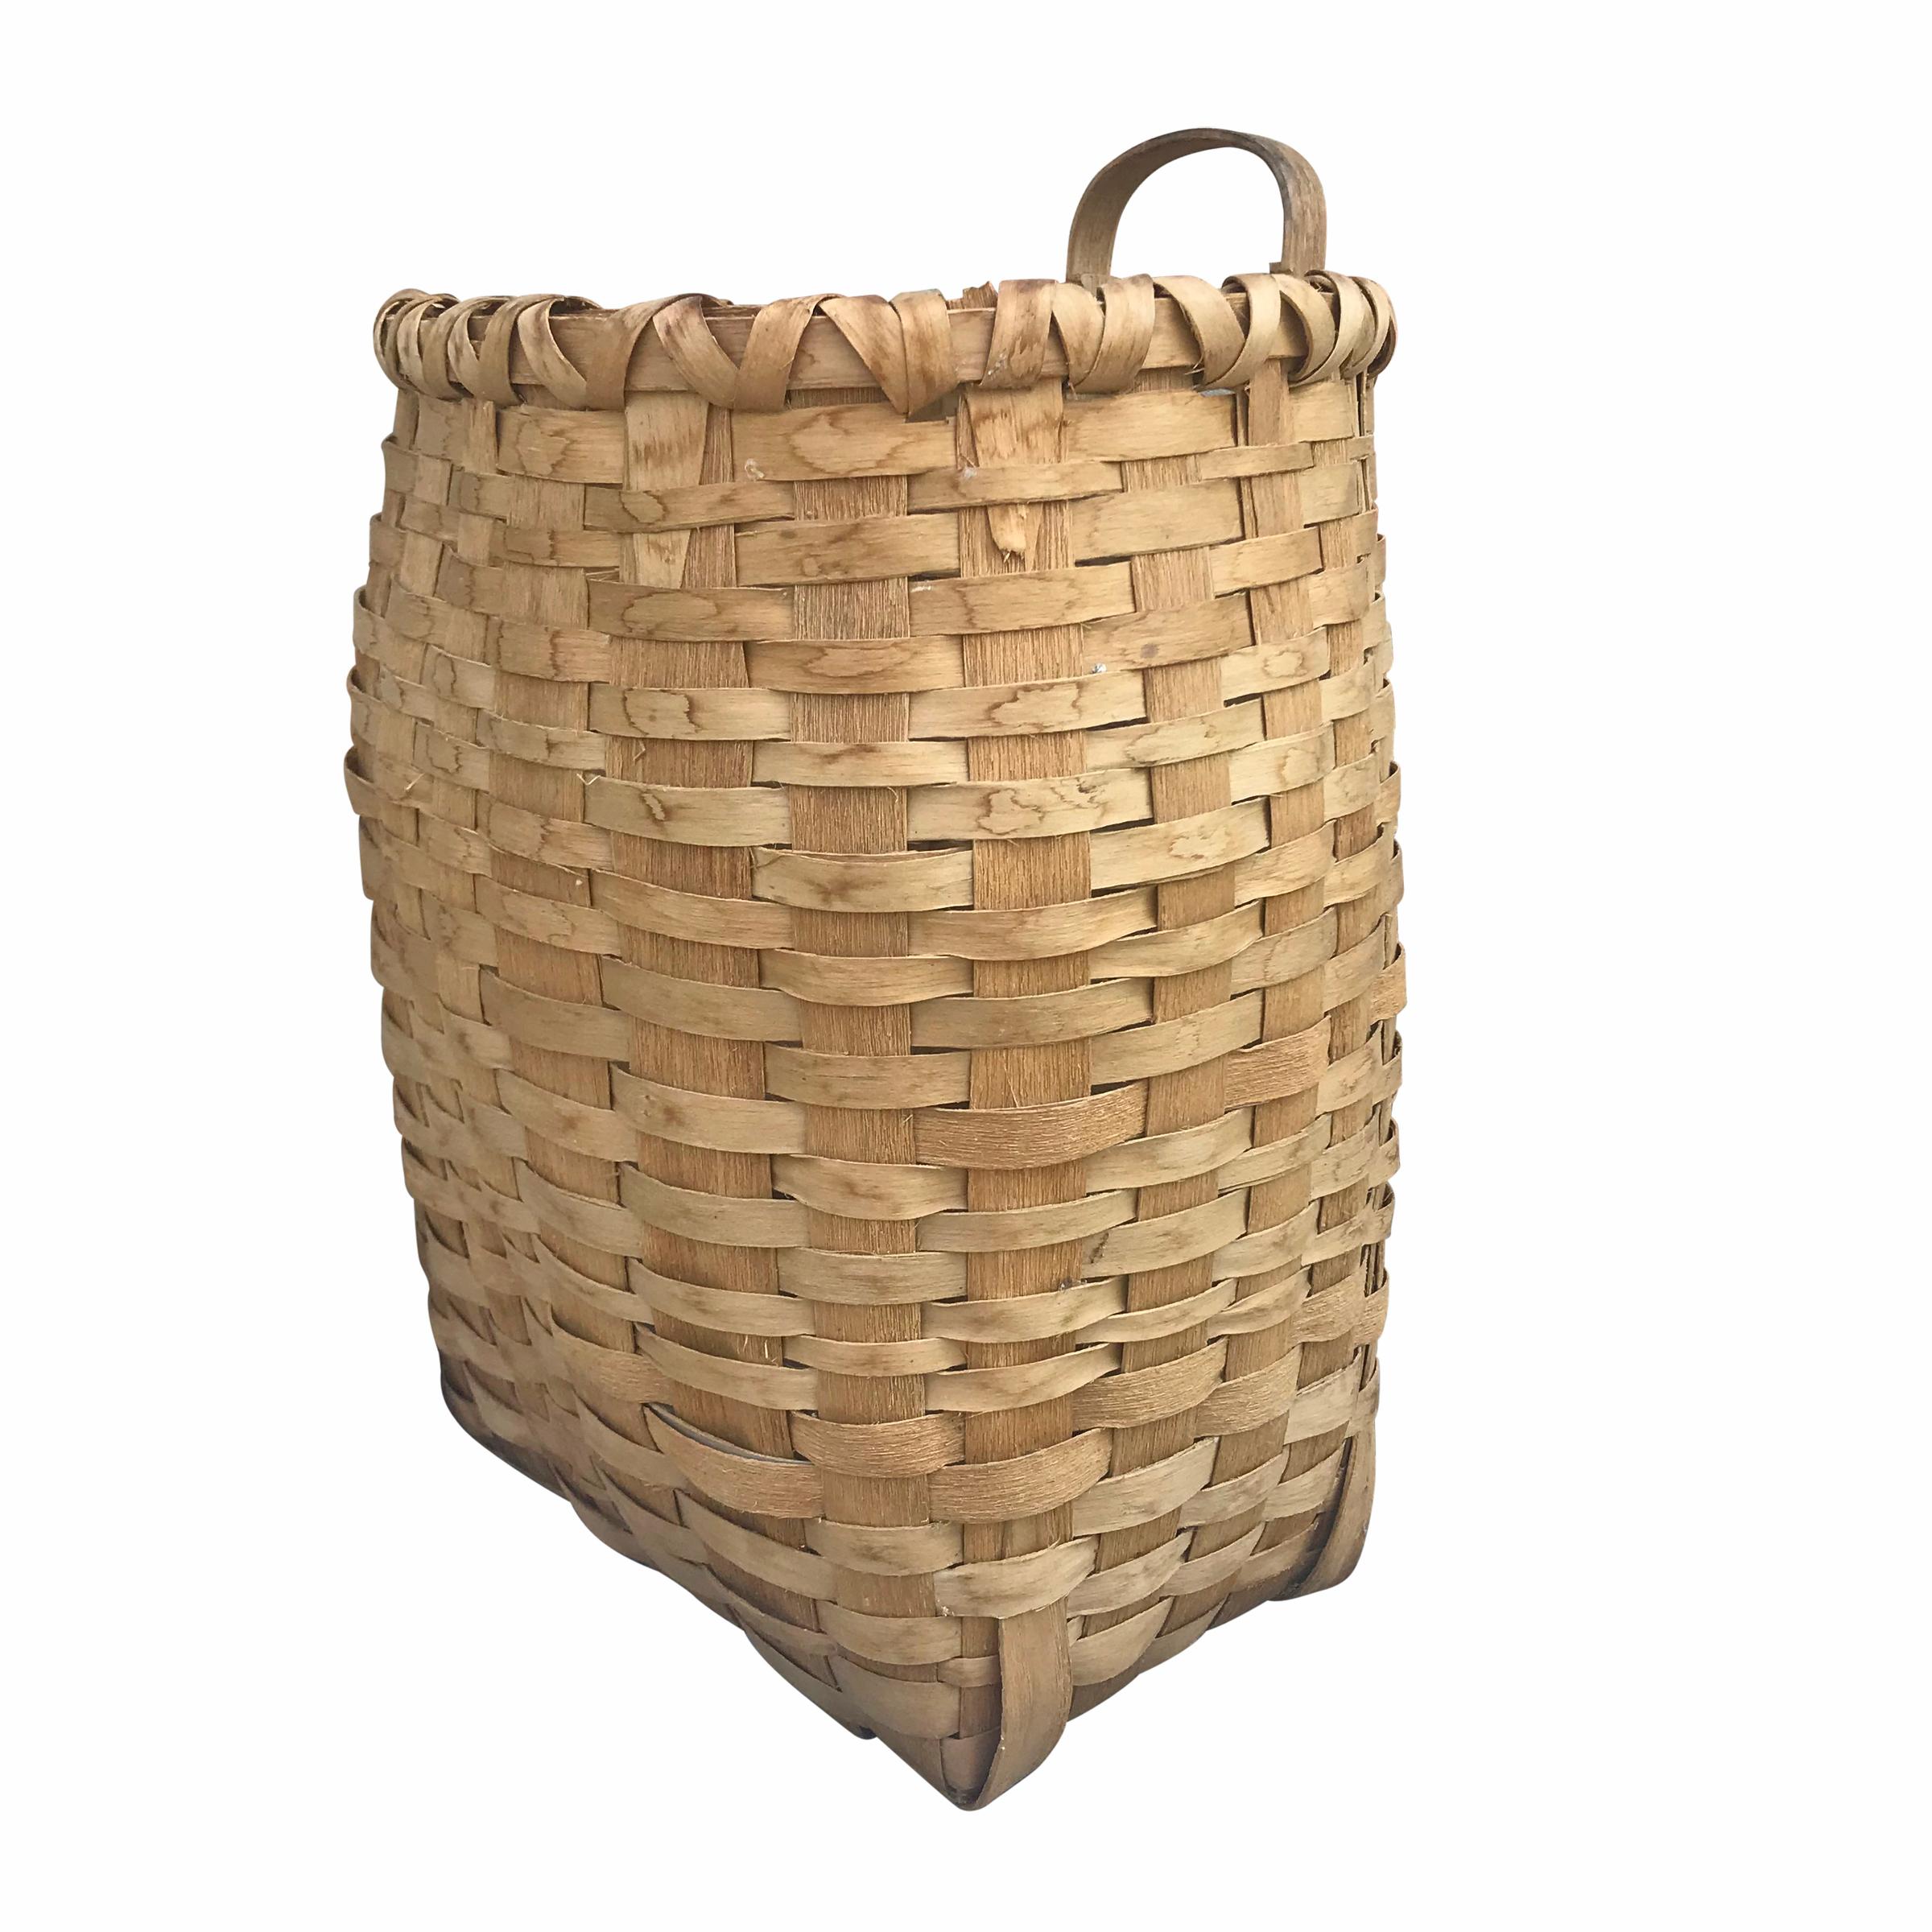 A sweet early 20th century handwoven ash splint gathering basket with an ovoid opening, a square base, a double banded rim, and one bentwood handle on the back. This basket was found in Northern Michigan. It's a lovely basket that can hang against